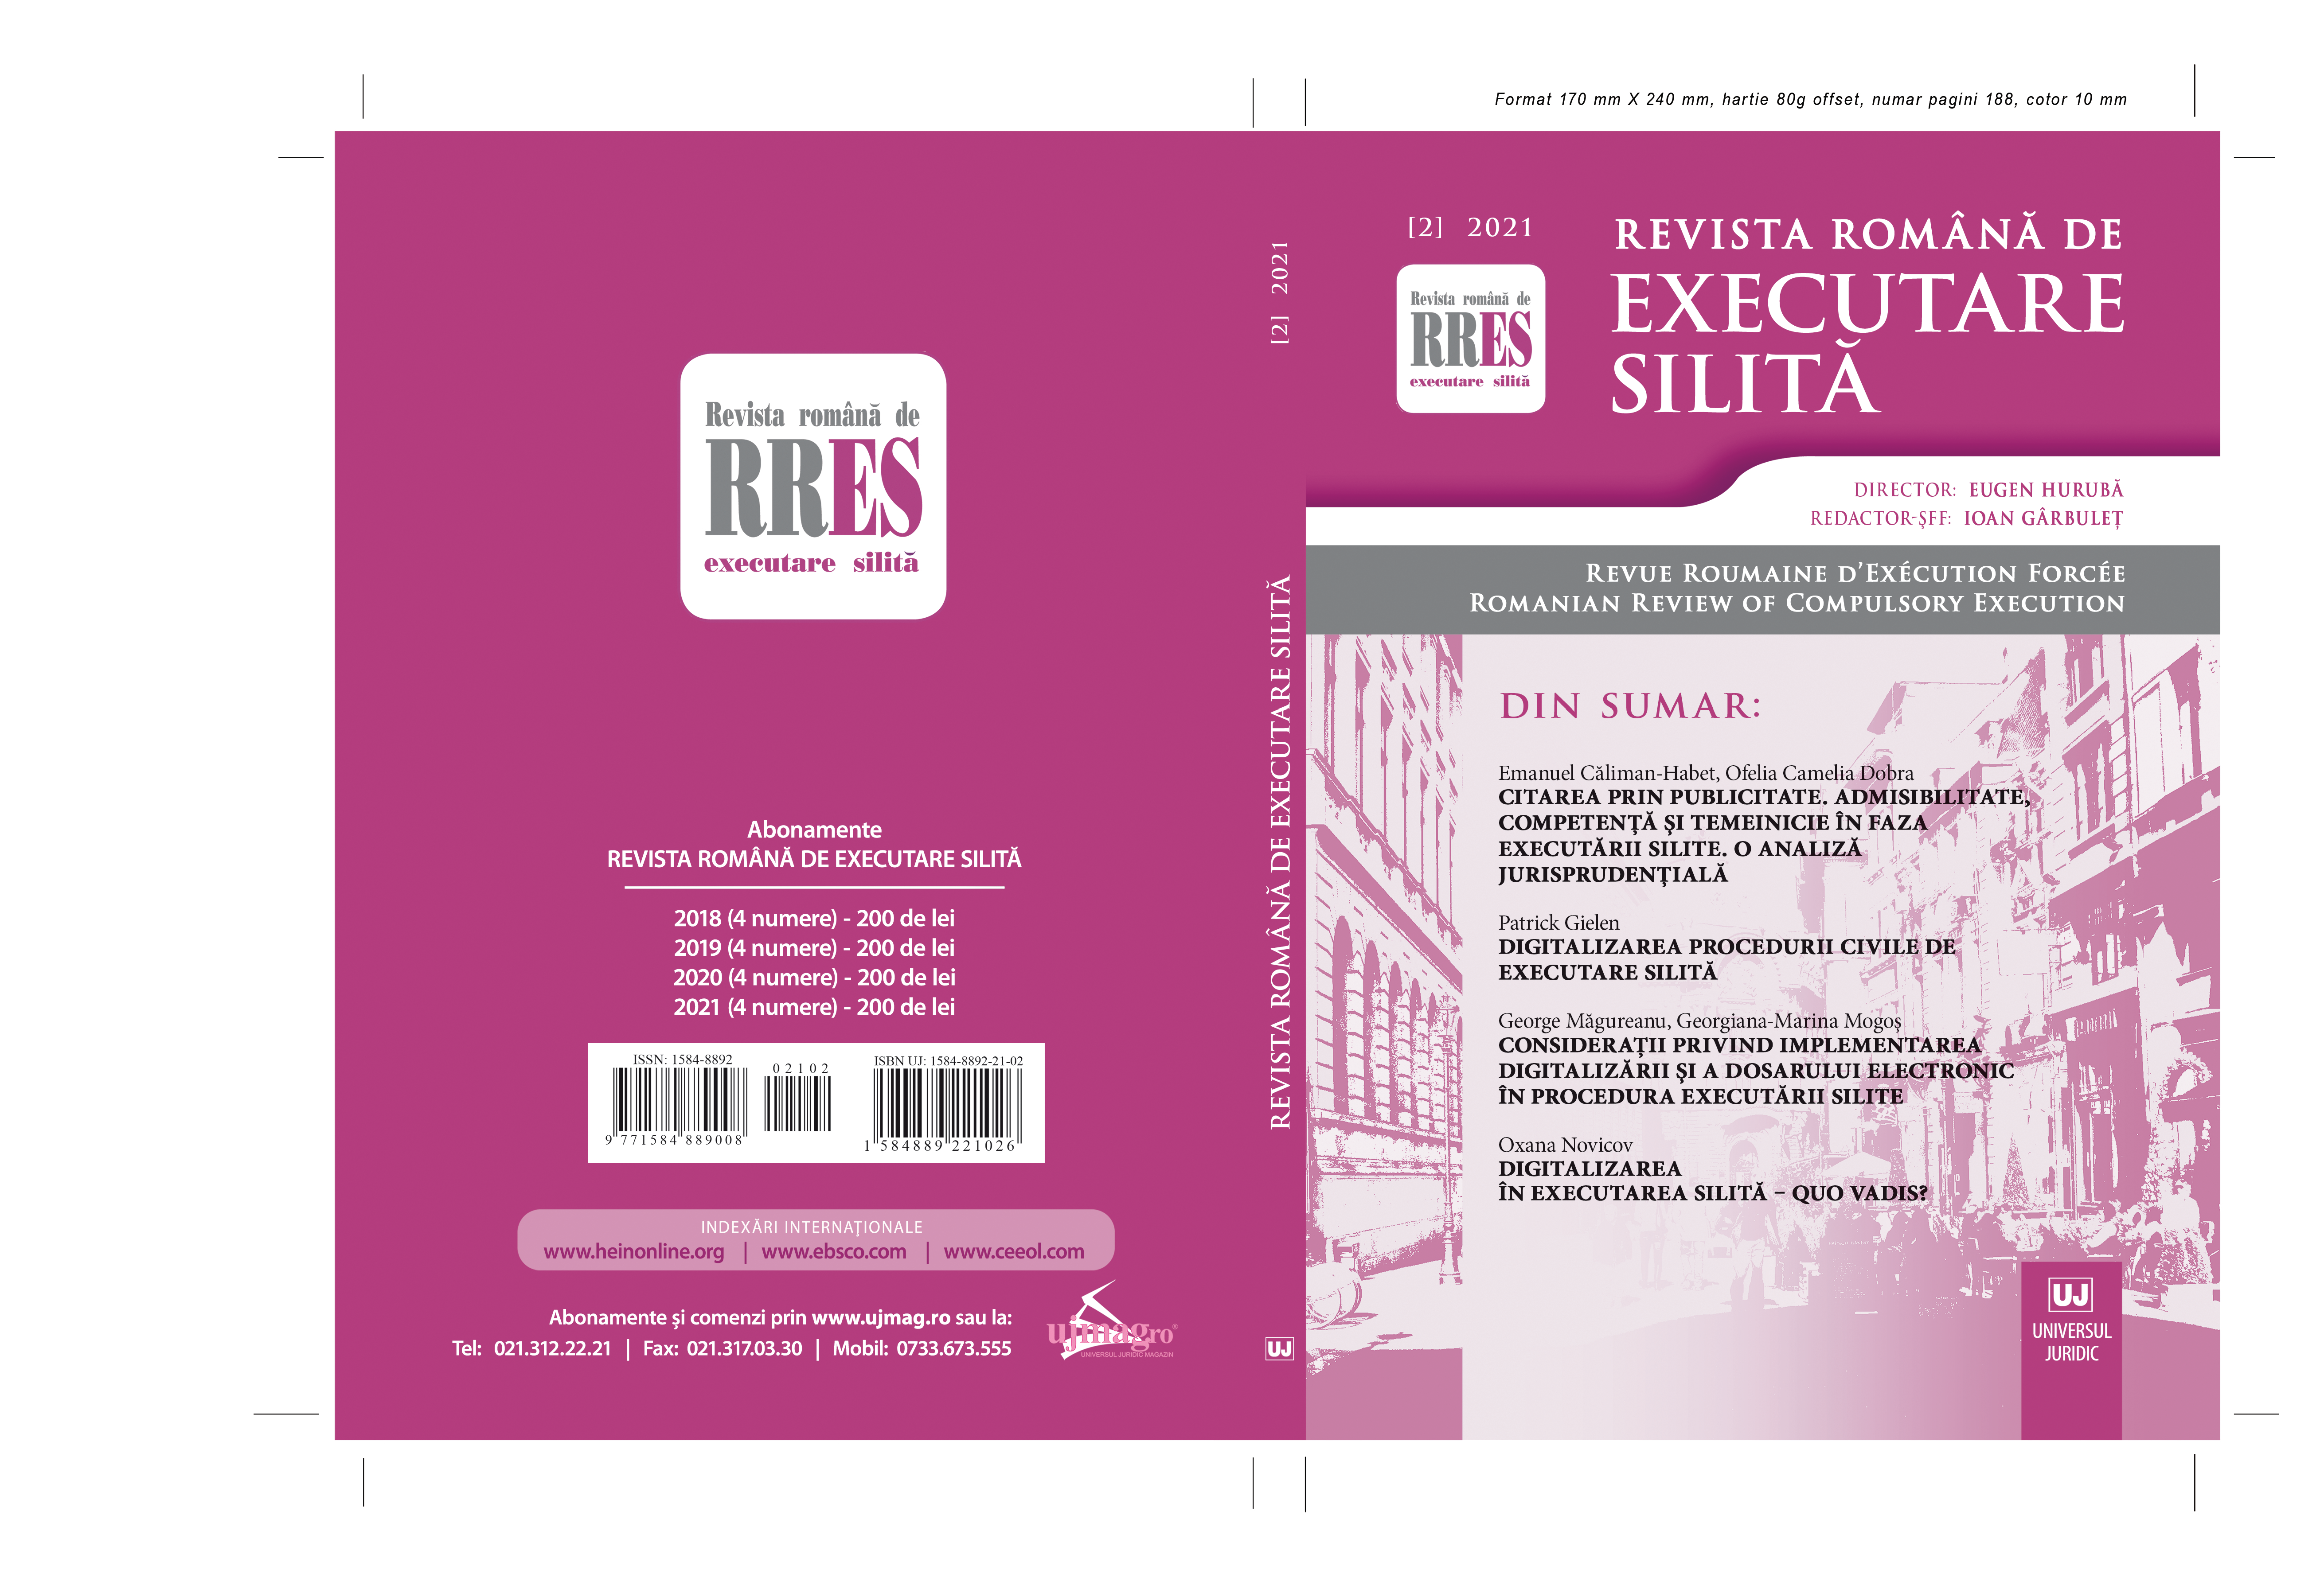 Summons by publicity. Admissibility, jurisdiction and soundness in the forced execution phase Cover Image